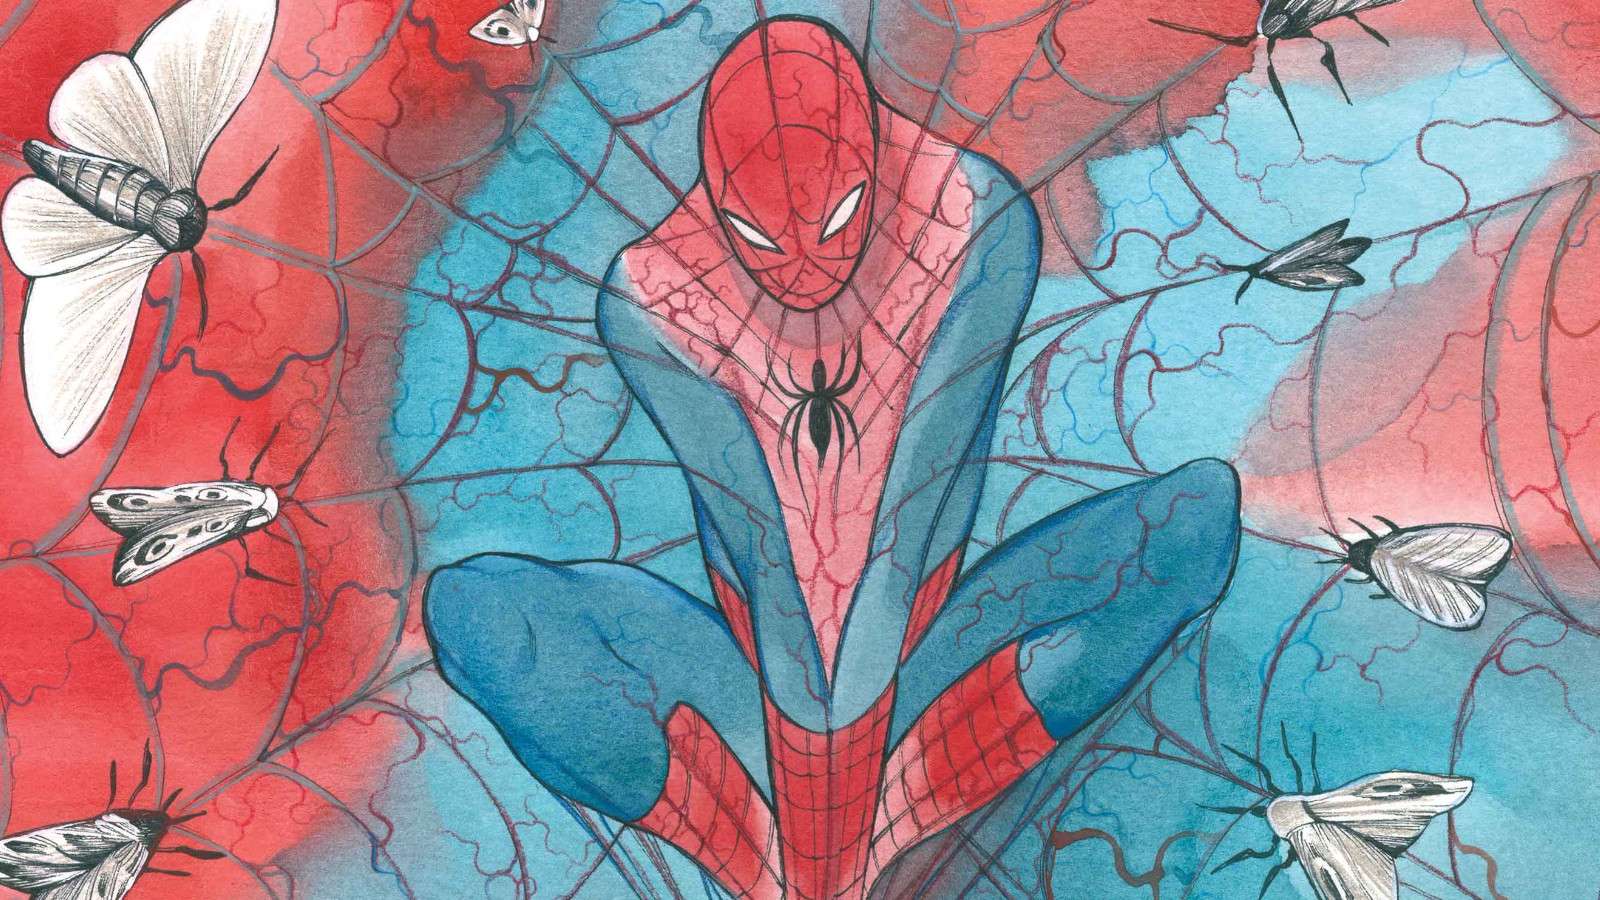 Amazing Spider-Man variant cover by Peach Momoko.